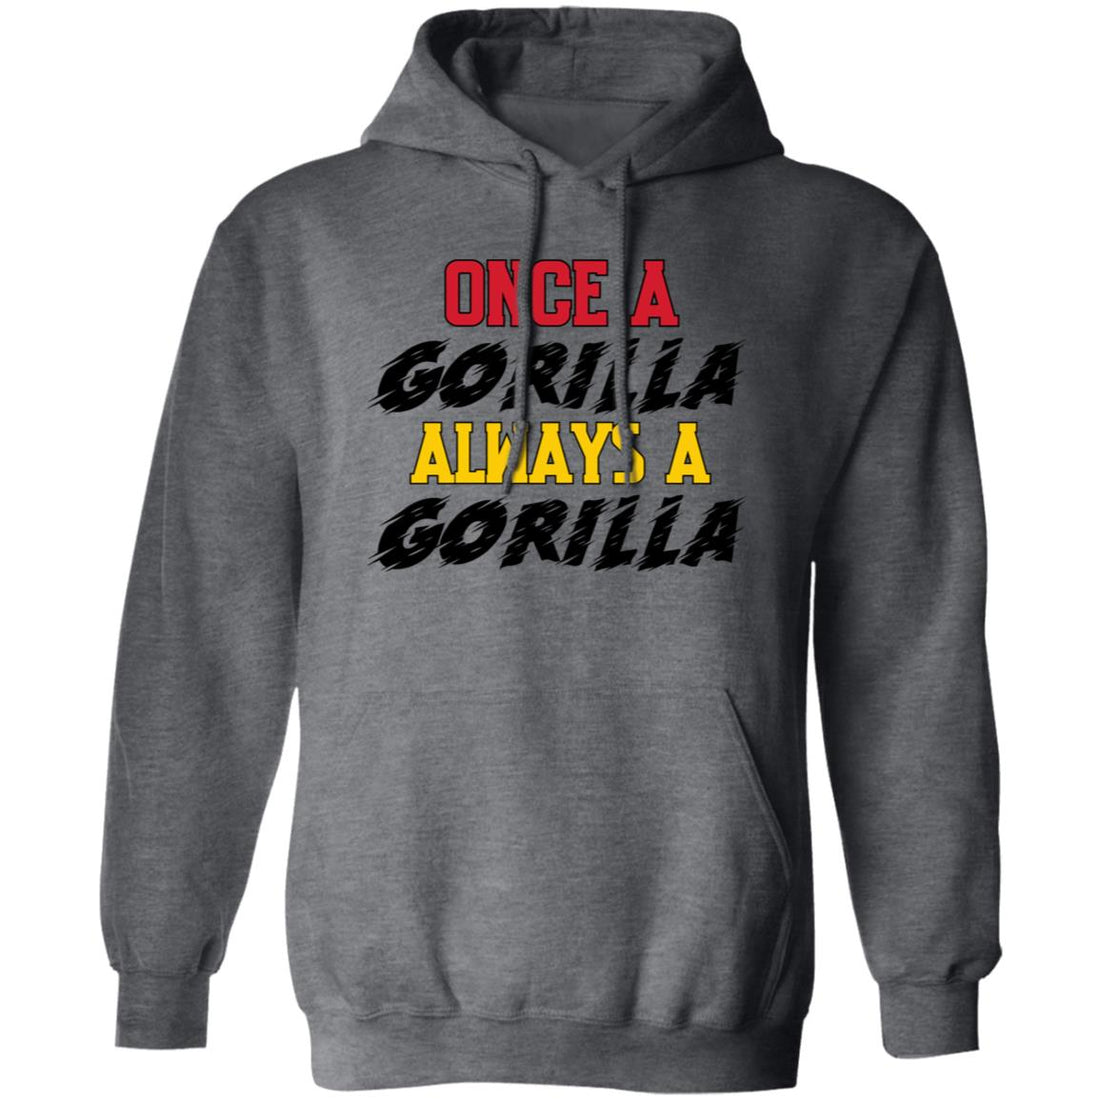 Once A Gorilla Pullover Hoodie - Sweatshirts - Positively Sassy - Once A Gorilla Pullover Hoodie